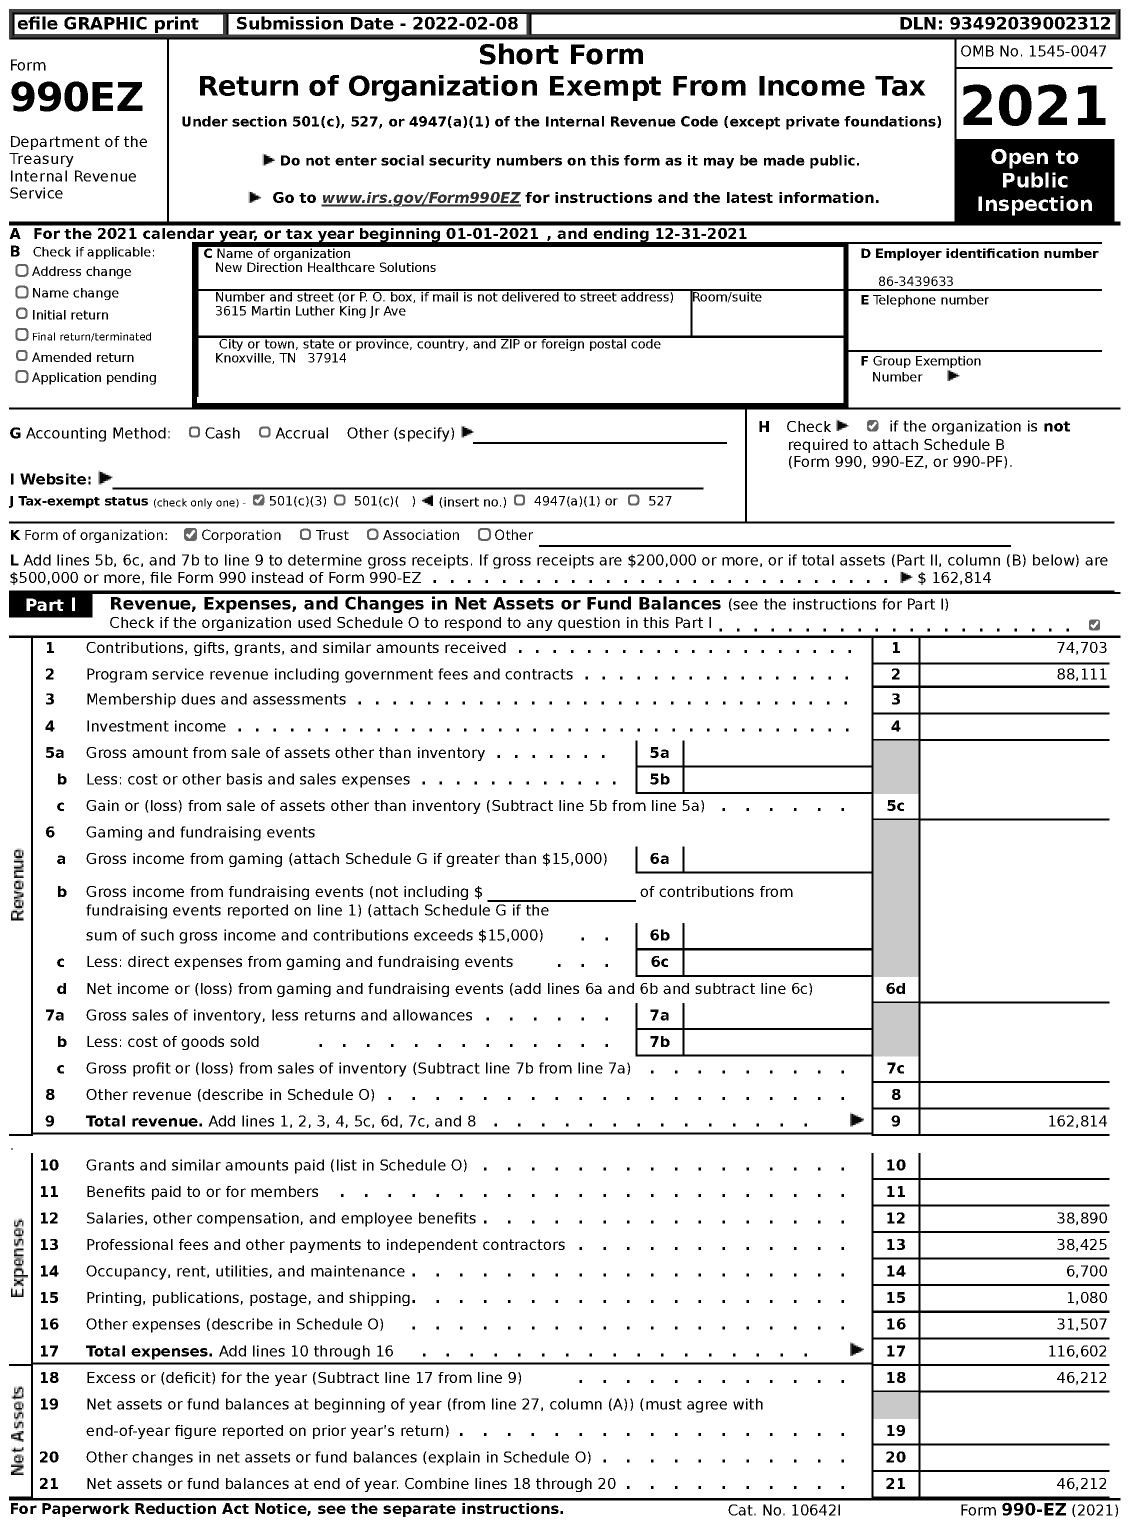 Image of first page of 2021 Form 990EZ for New Direction Healthcare Solutions